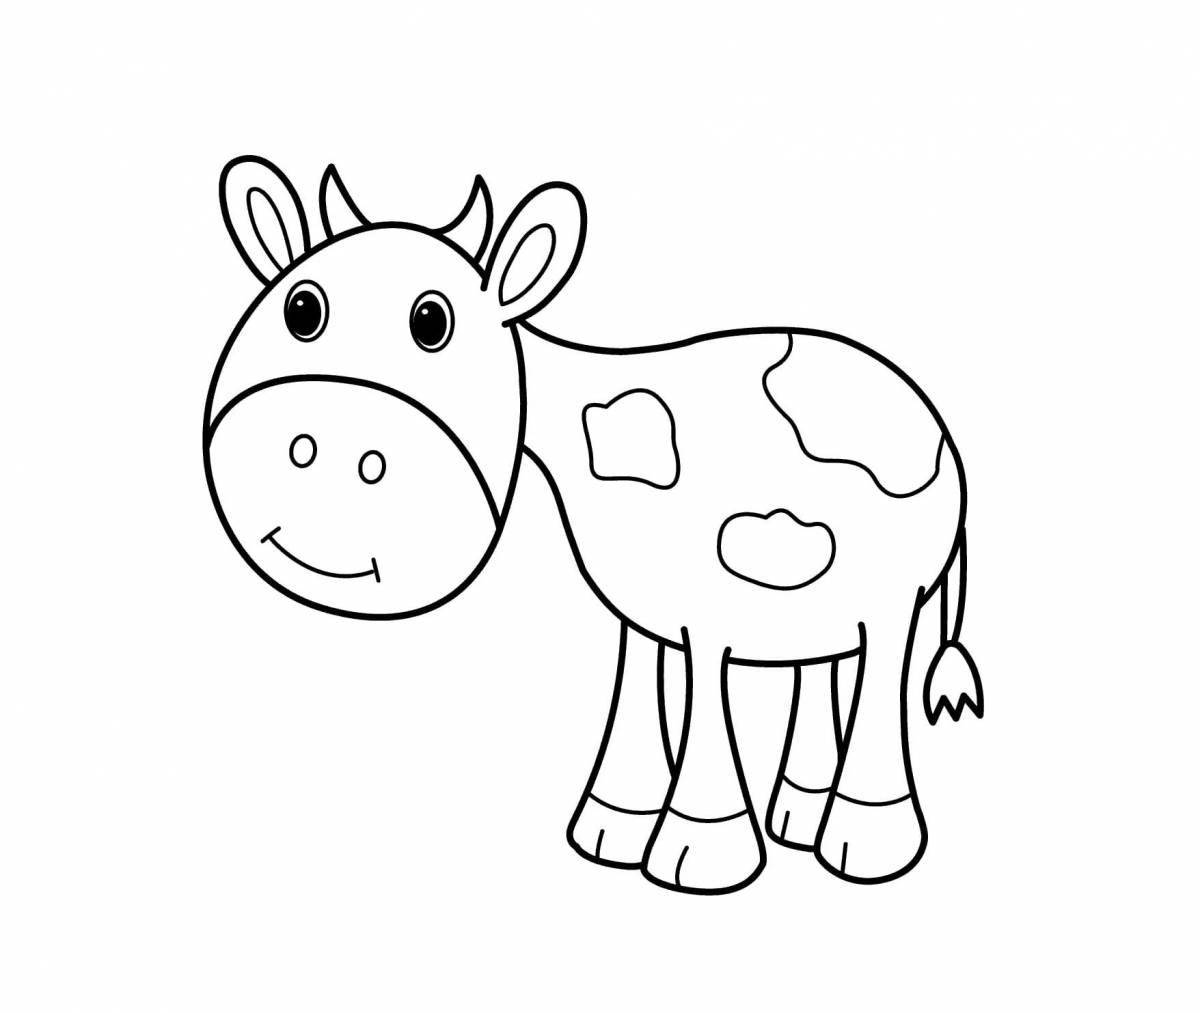 Great cow coloring book for 4-5 year olds